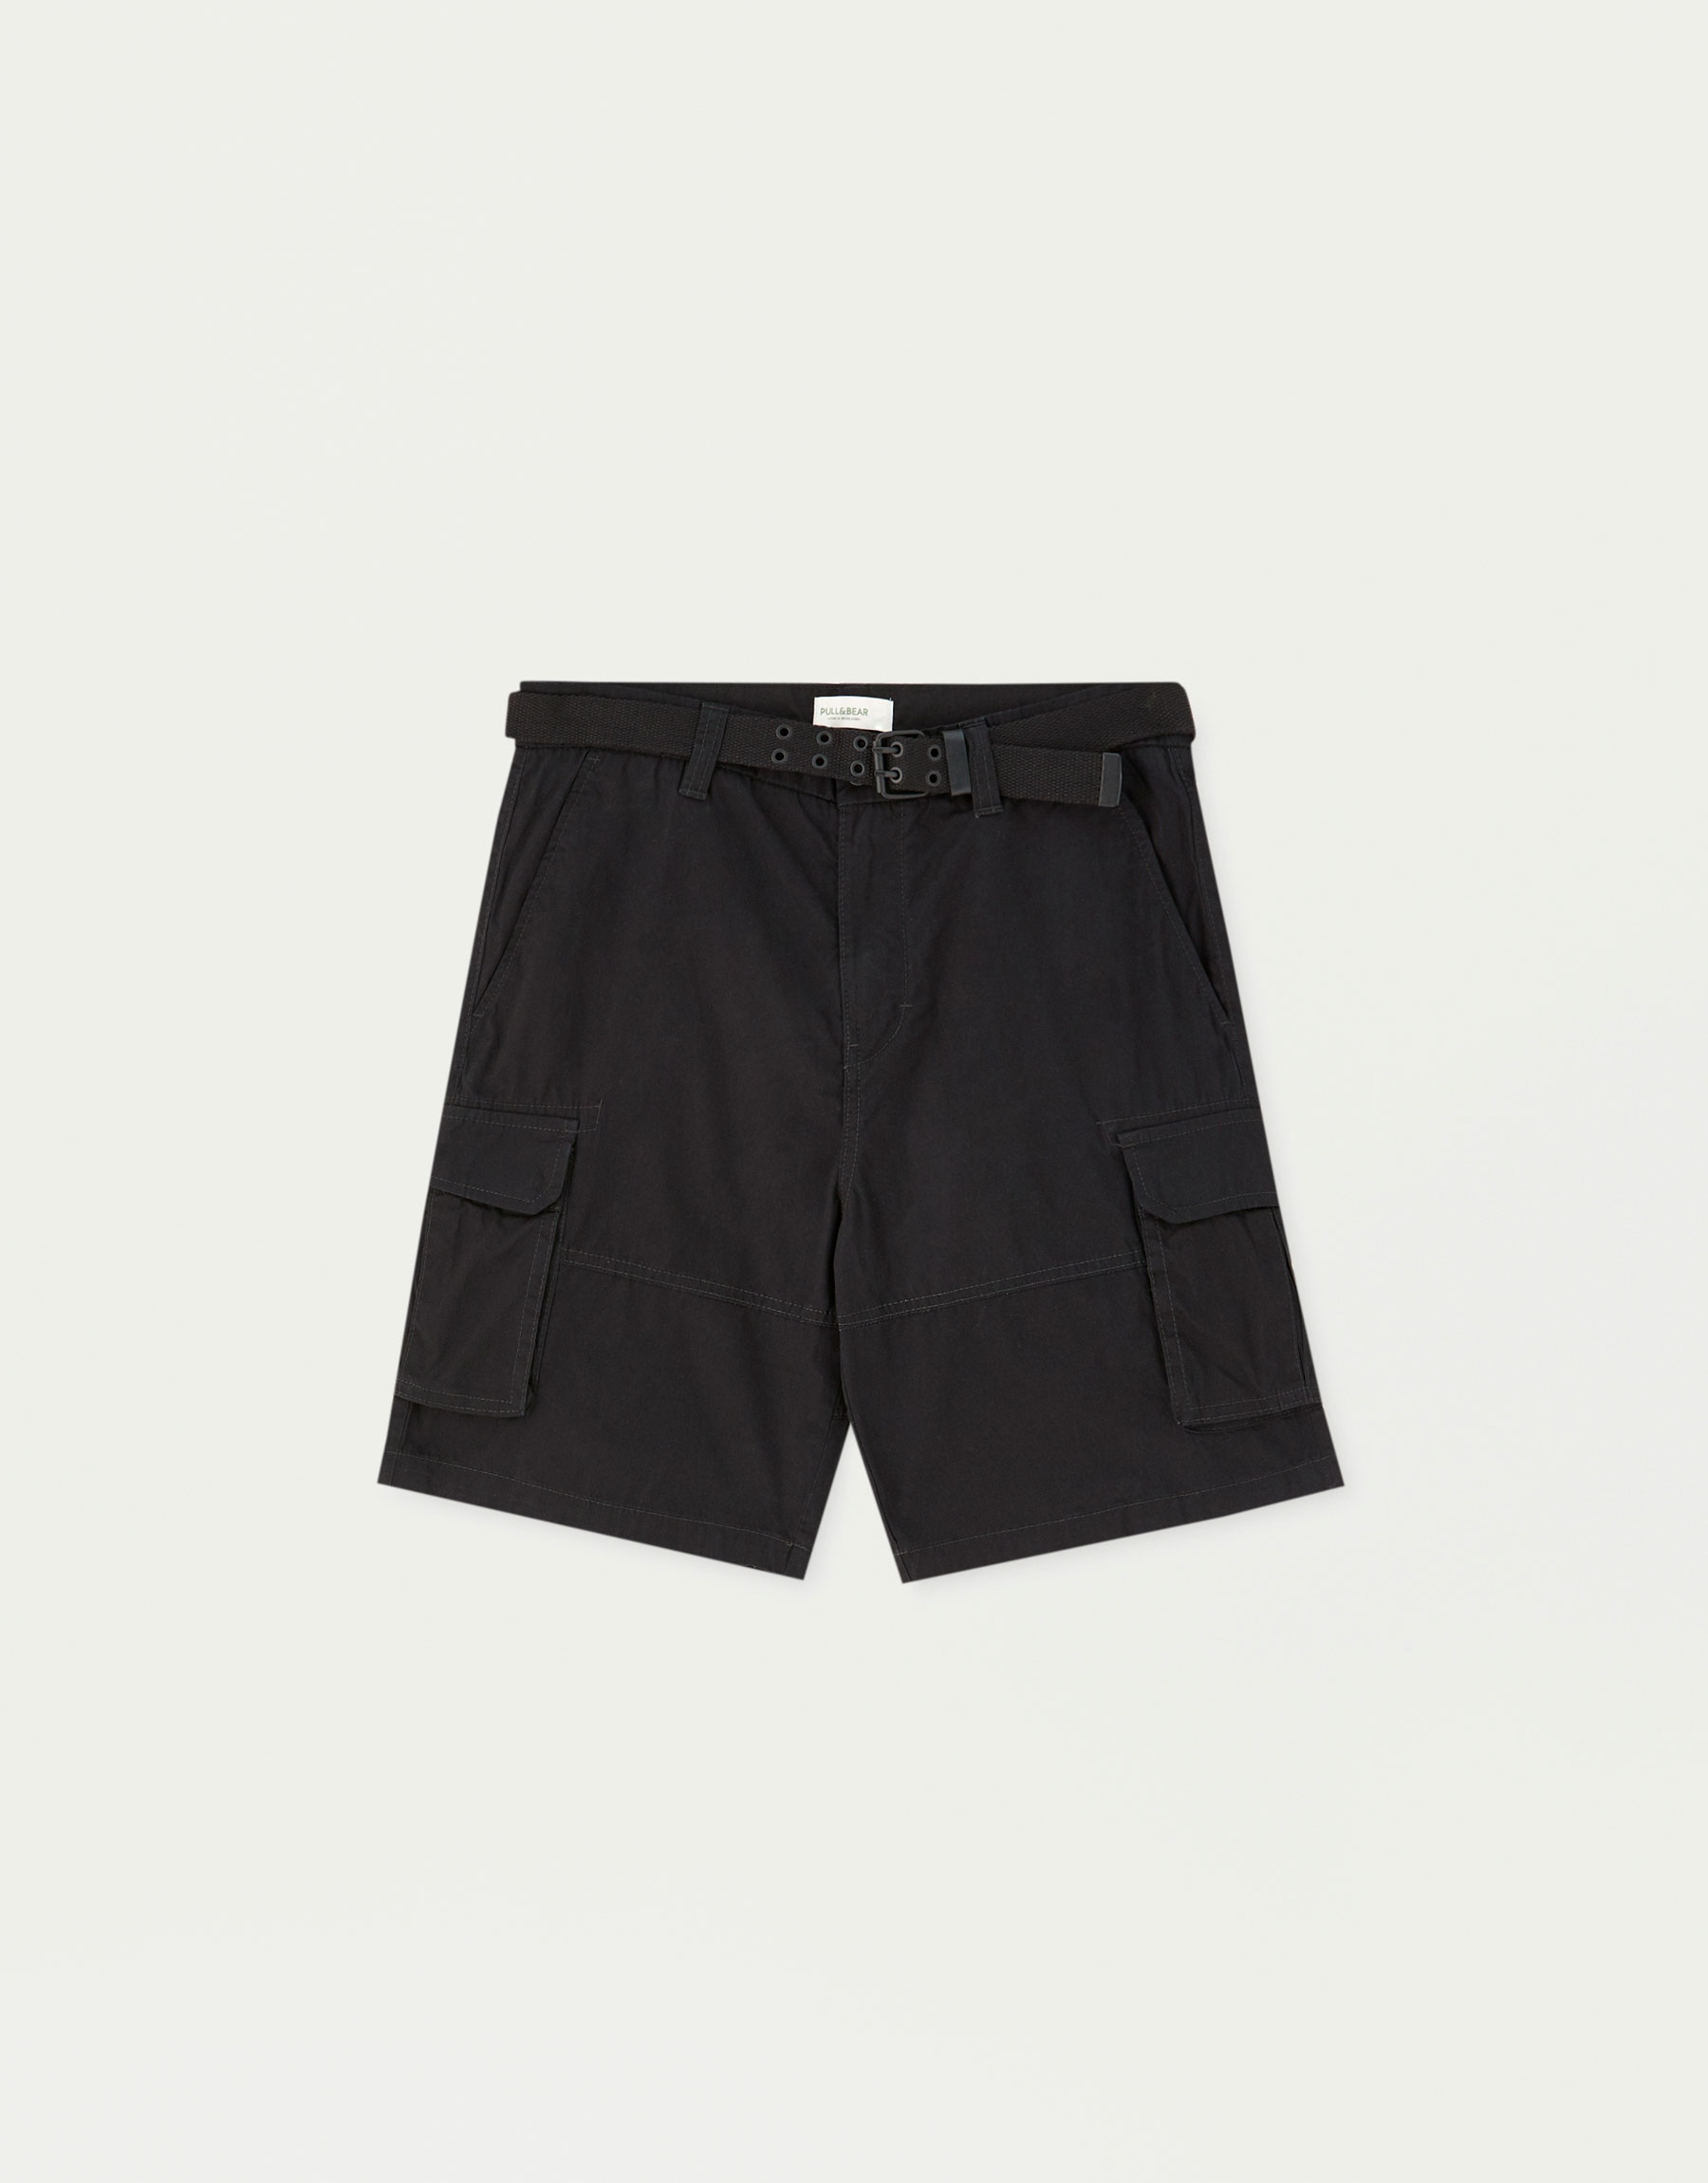 Shorts - Cargo Bermuda shorts with belt and buckle.